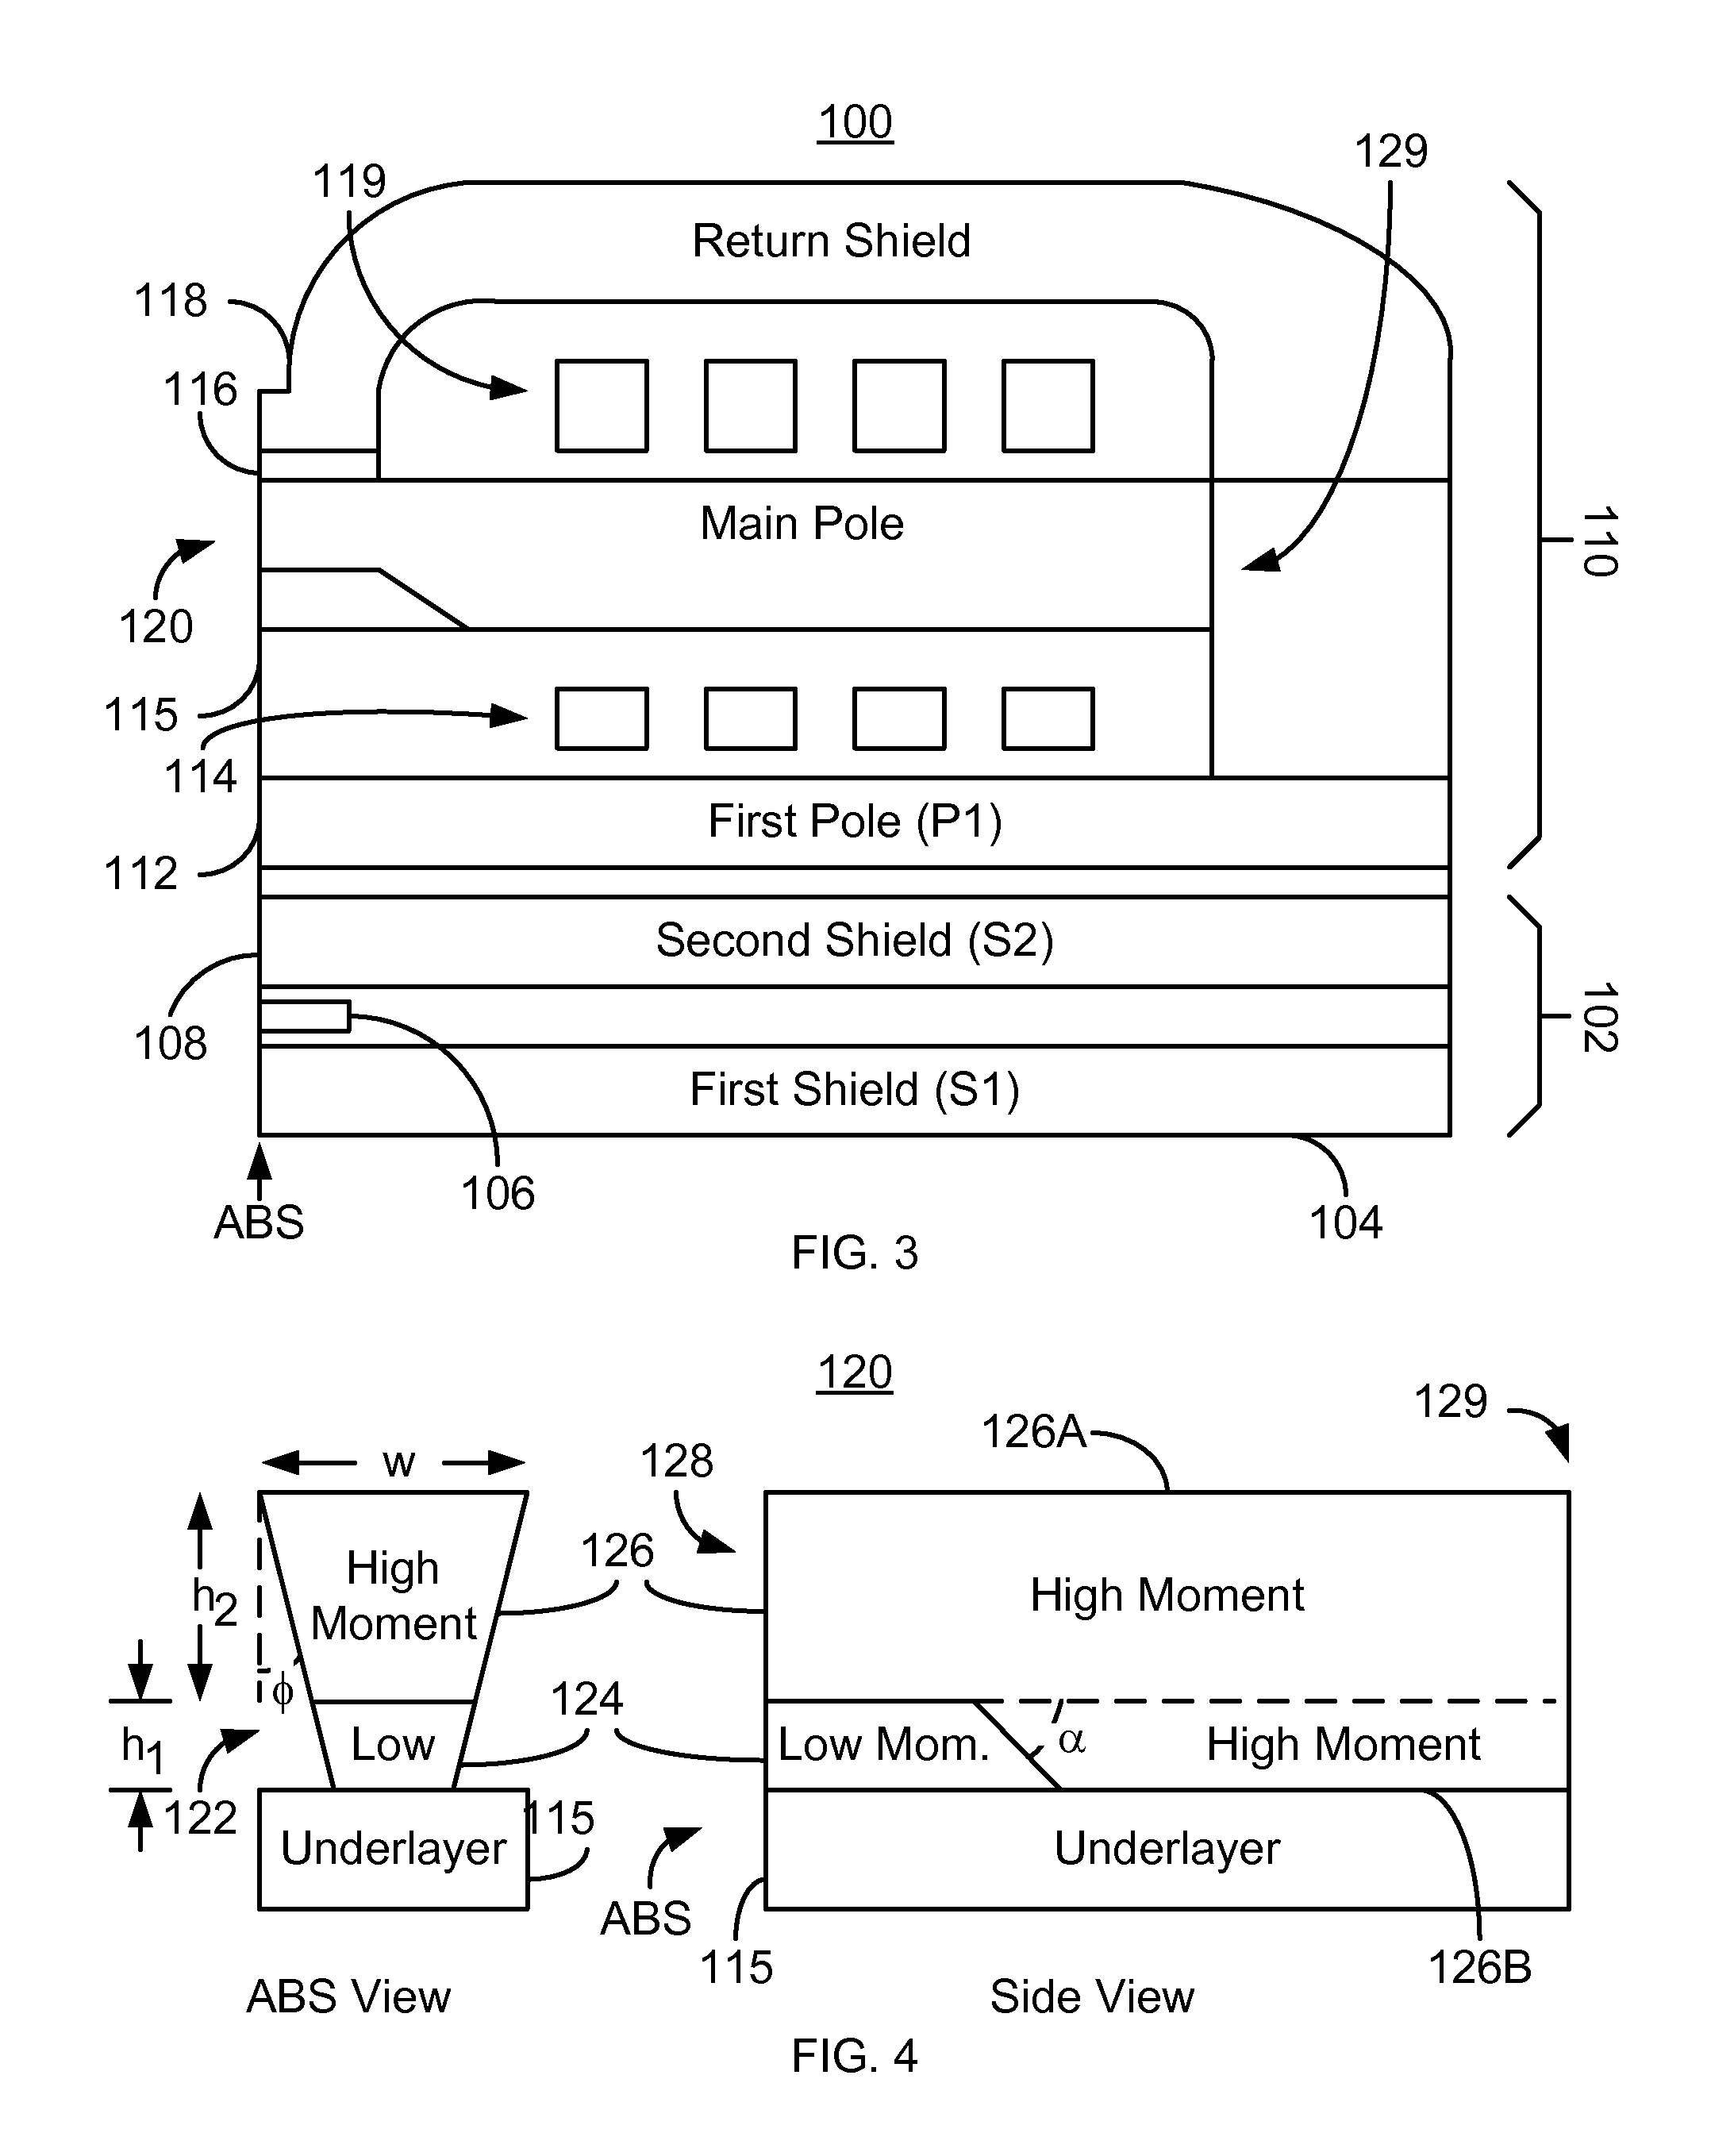 Method for providing a magnetic recording transducer having a hybrid moment pole